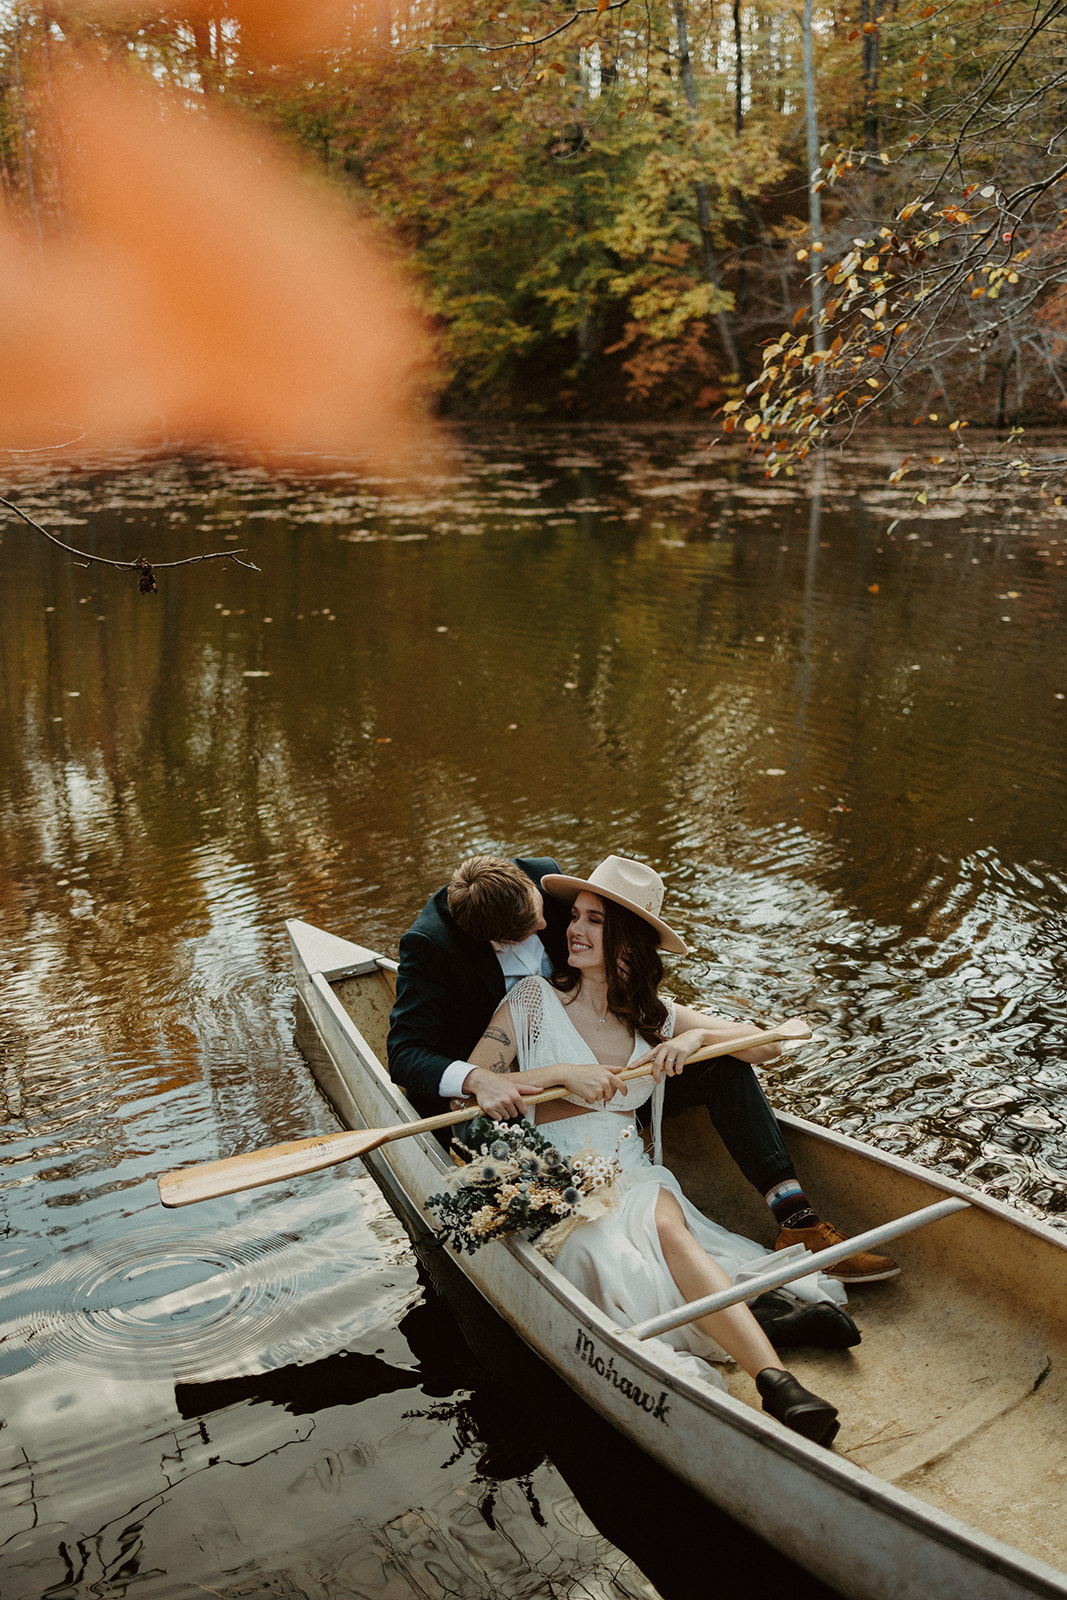 the couple sitting together in a canoe